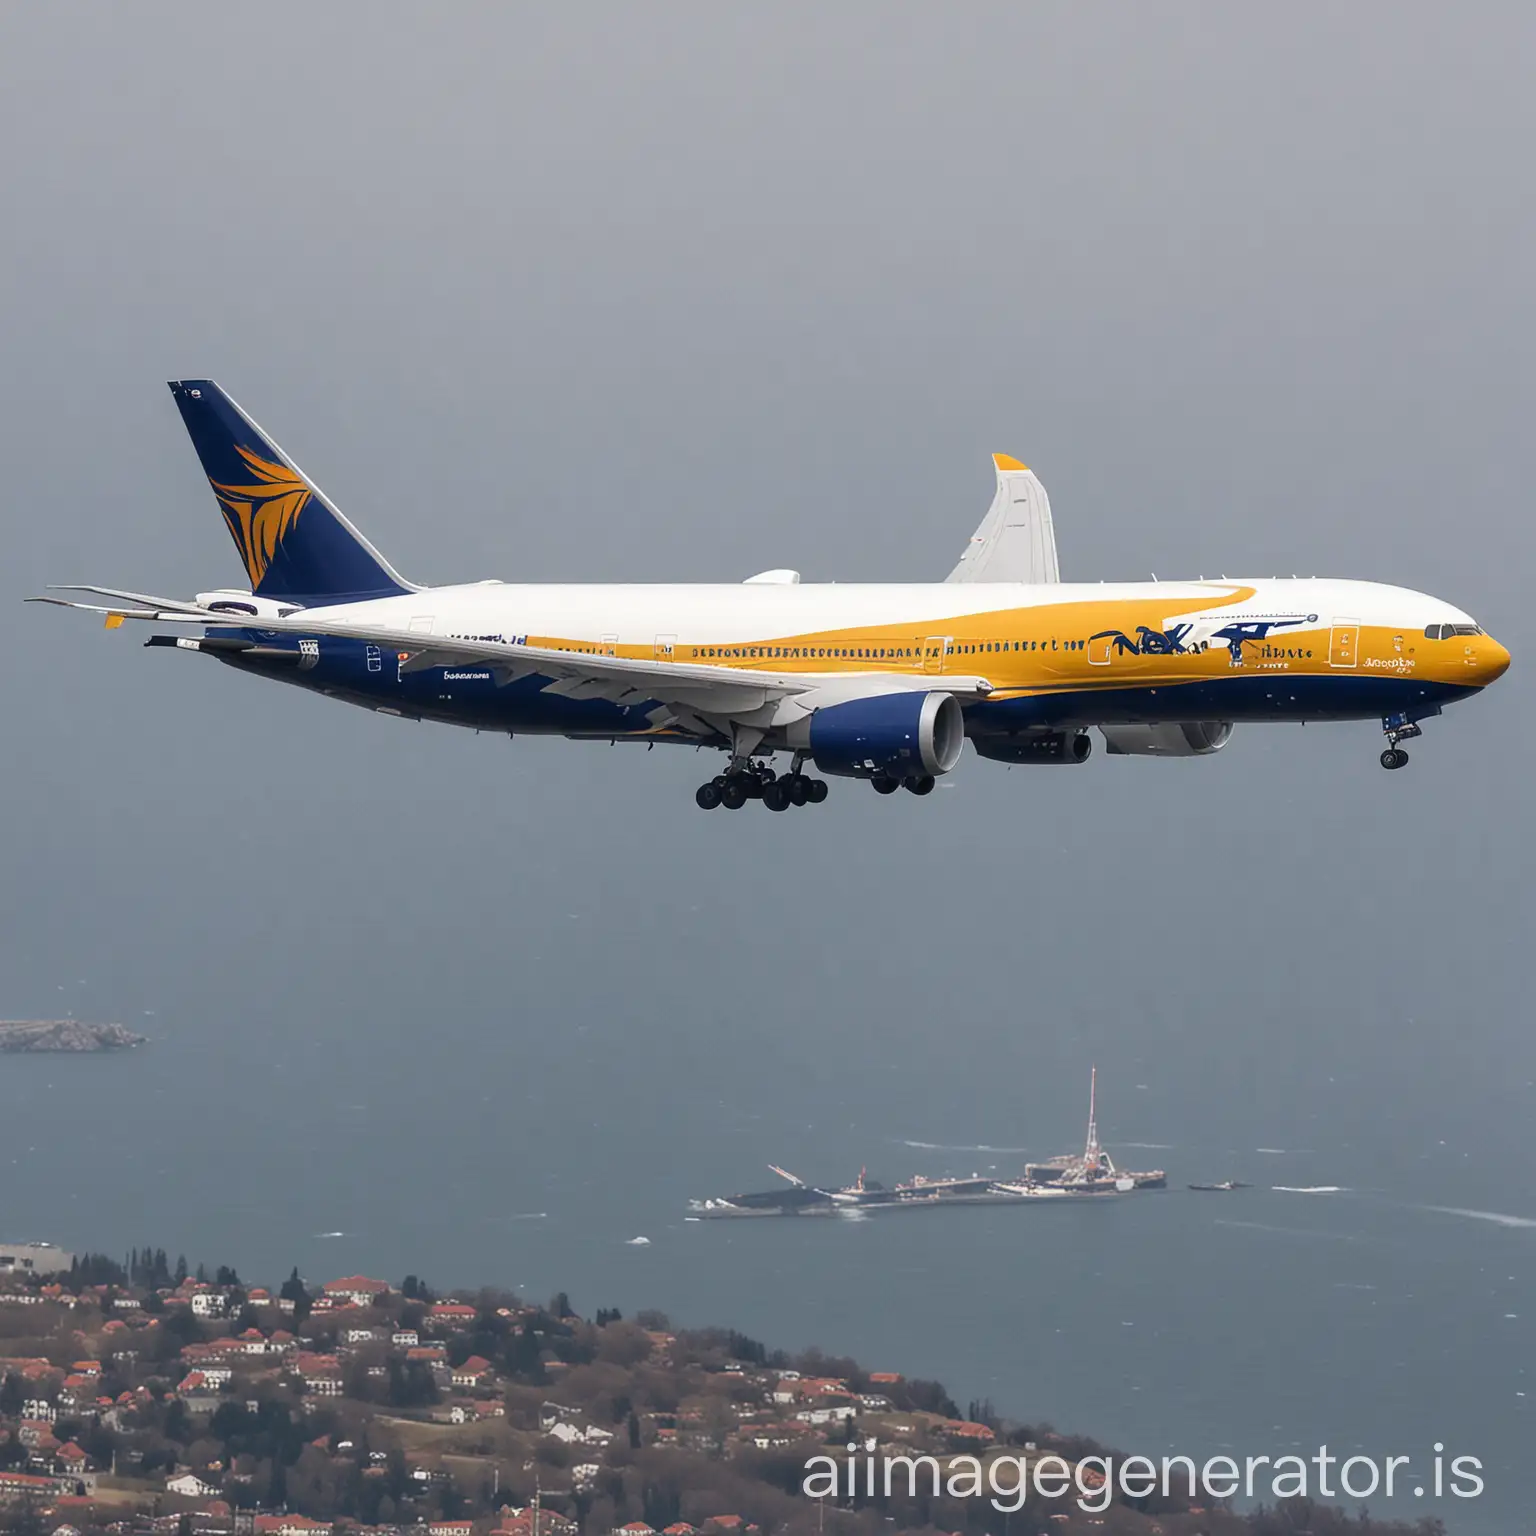 A cargo Boeing 777 flying with the brand “next cargo express” and the main colours are navy and mustard